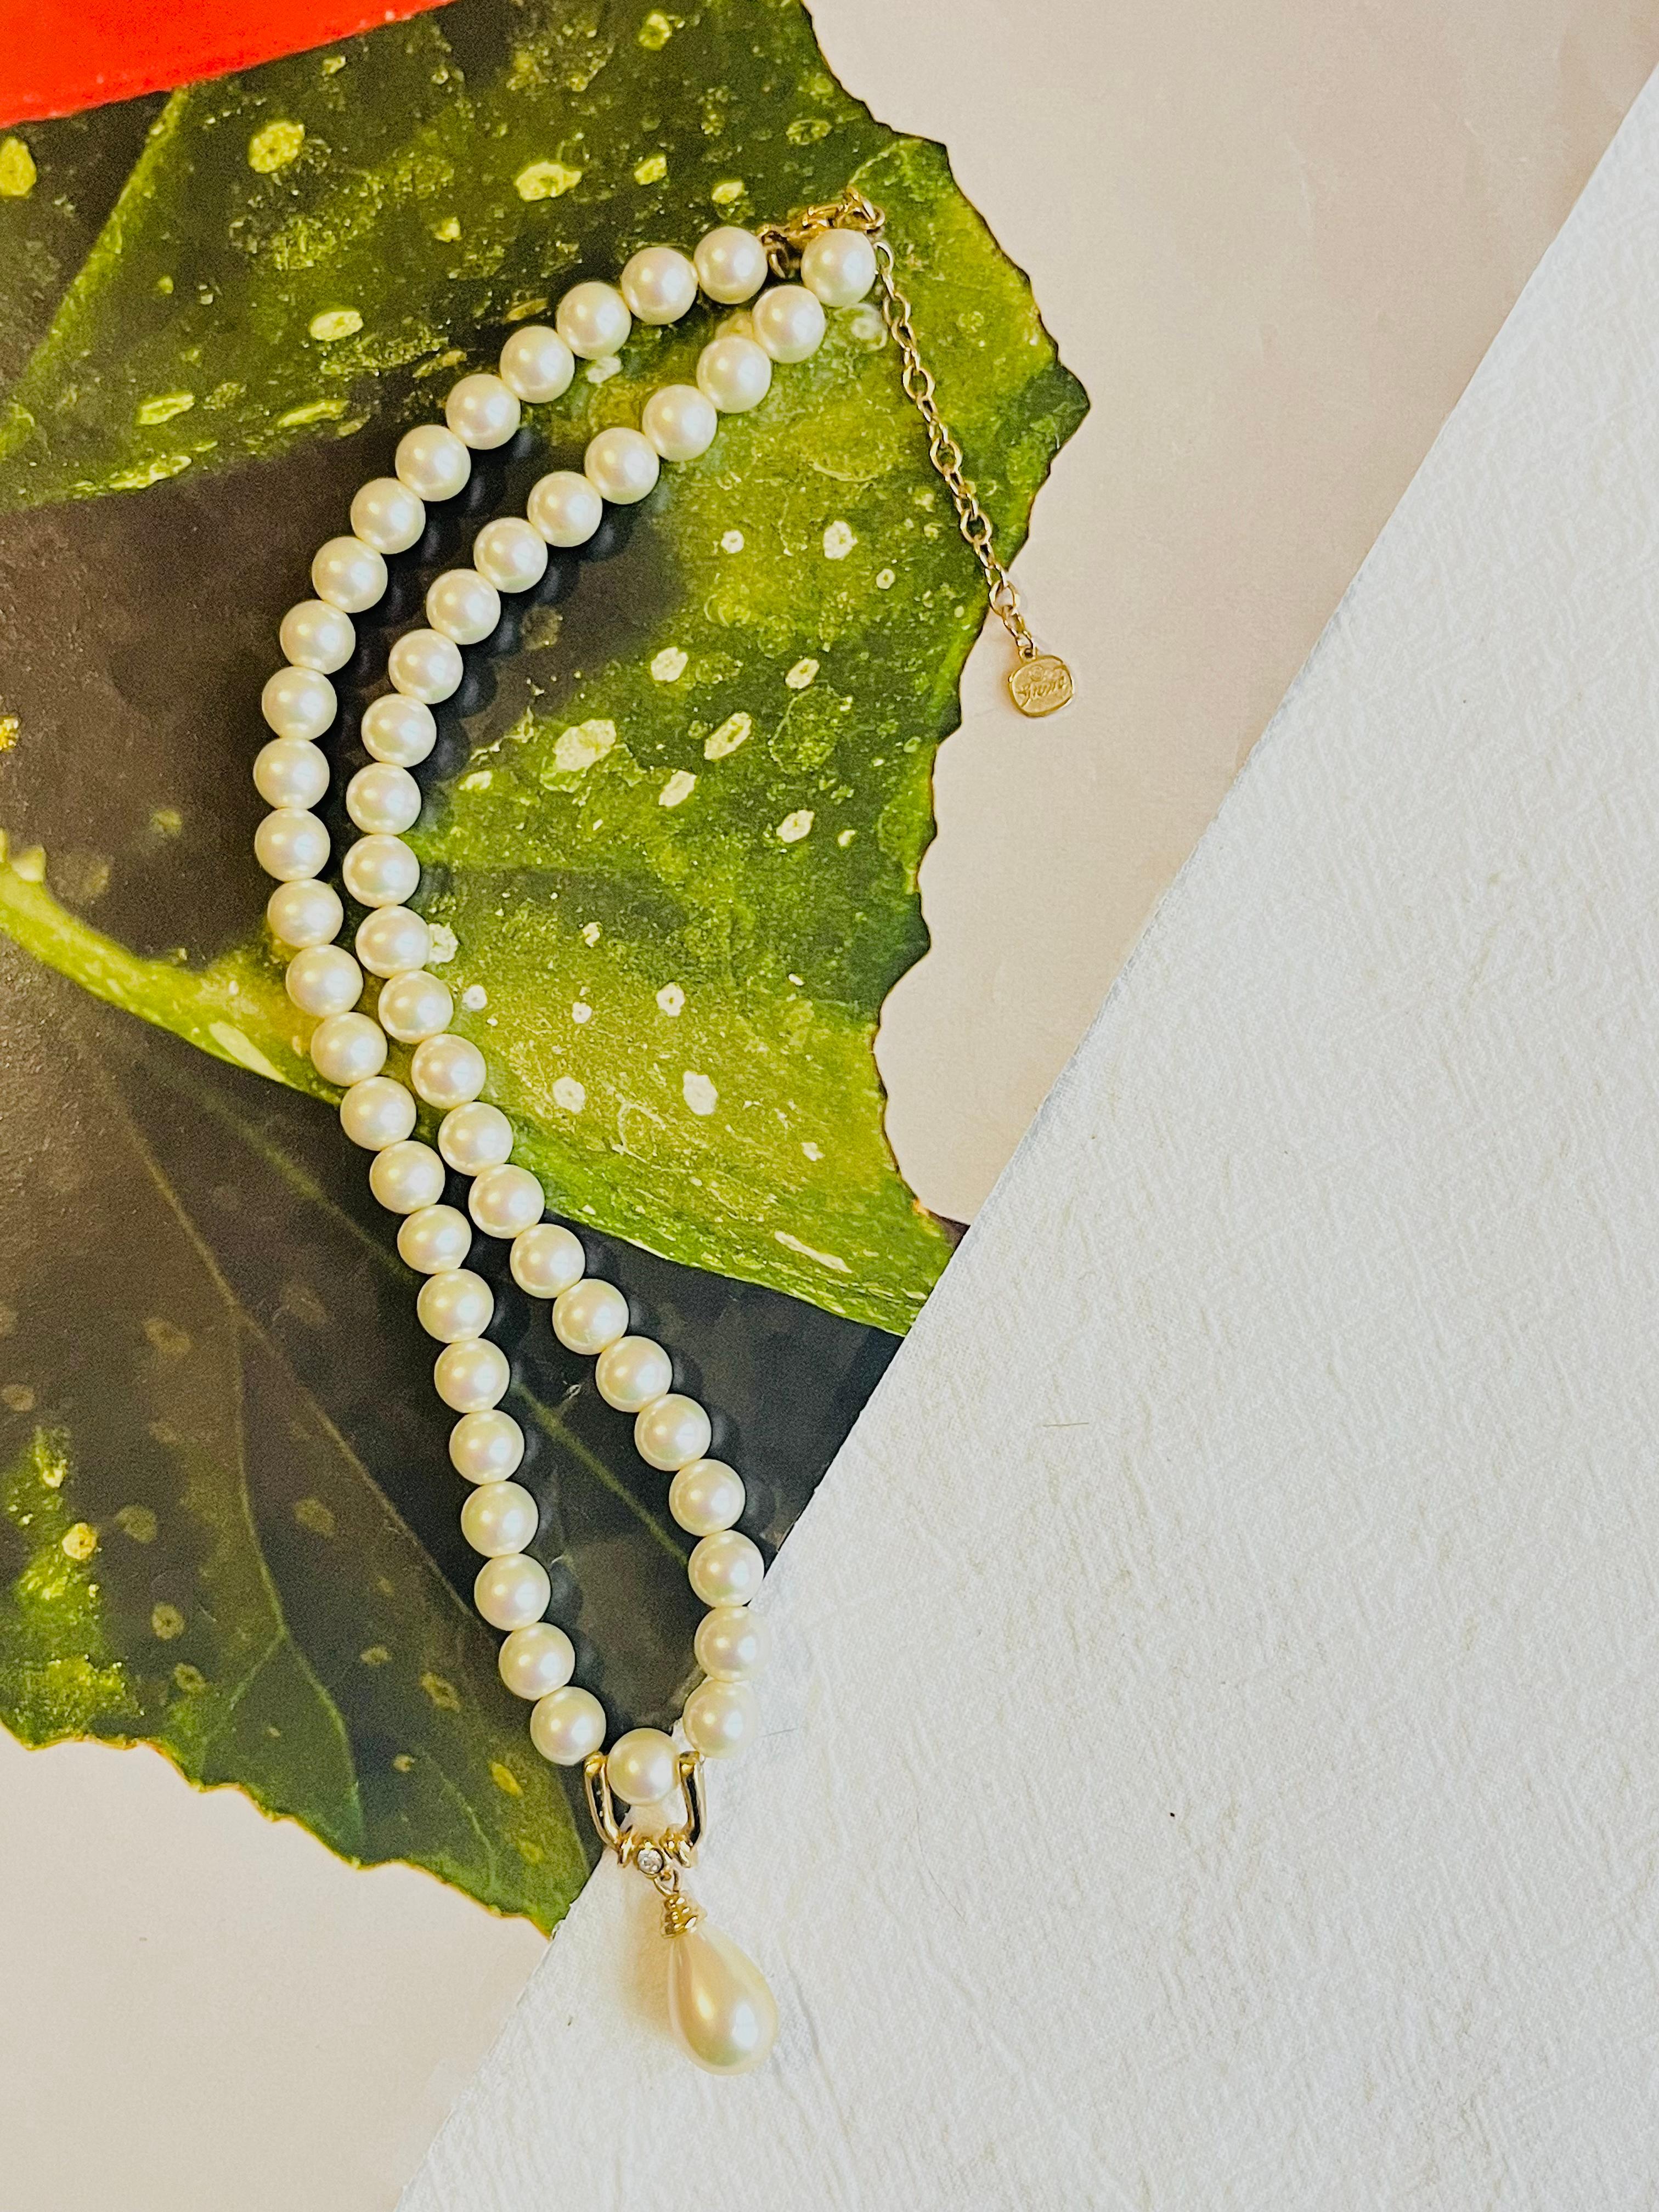 Christian Dior GROSSE 1960s White Pearls Water Drop Pendant Crystals Necklace In Excellent Condition For Sale In Wokingham, England